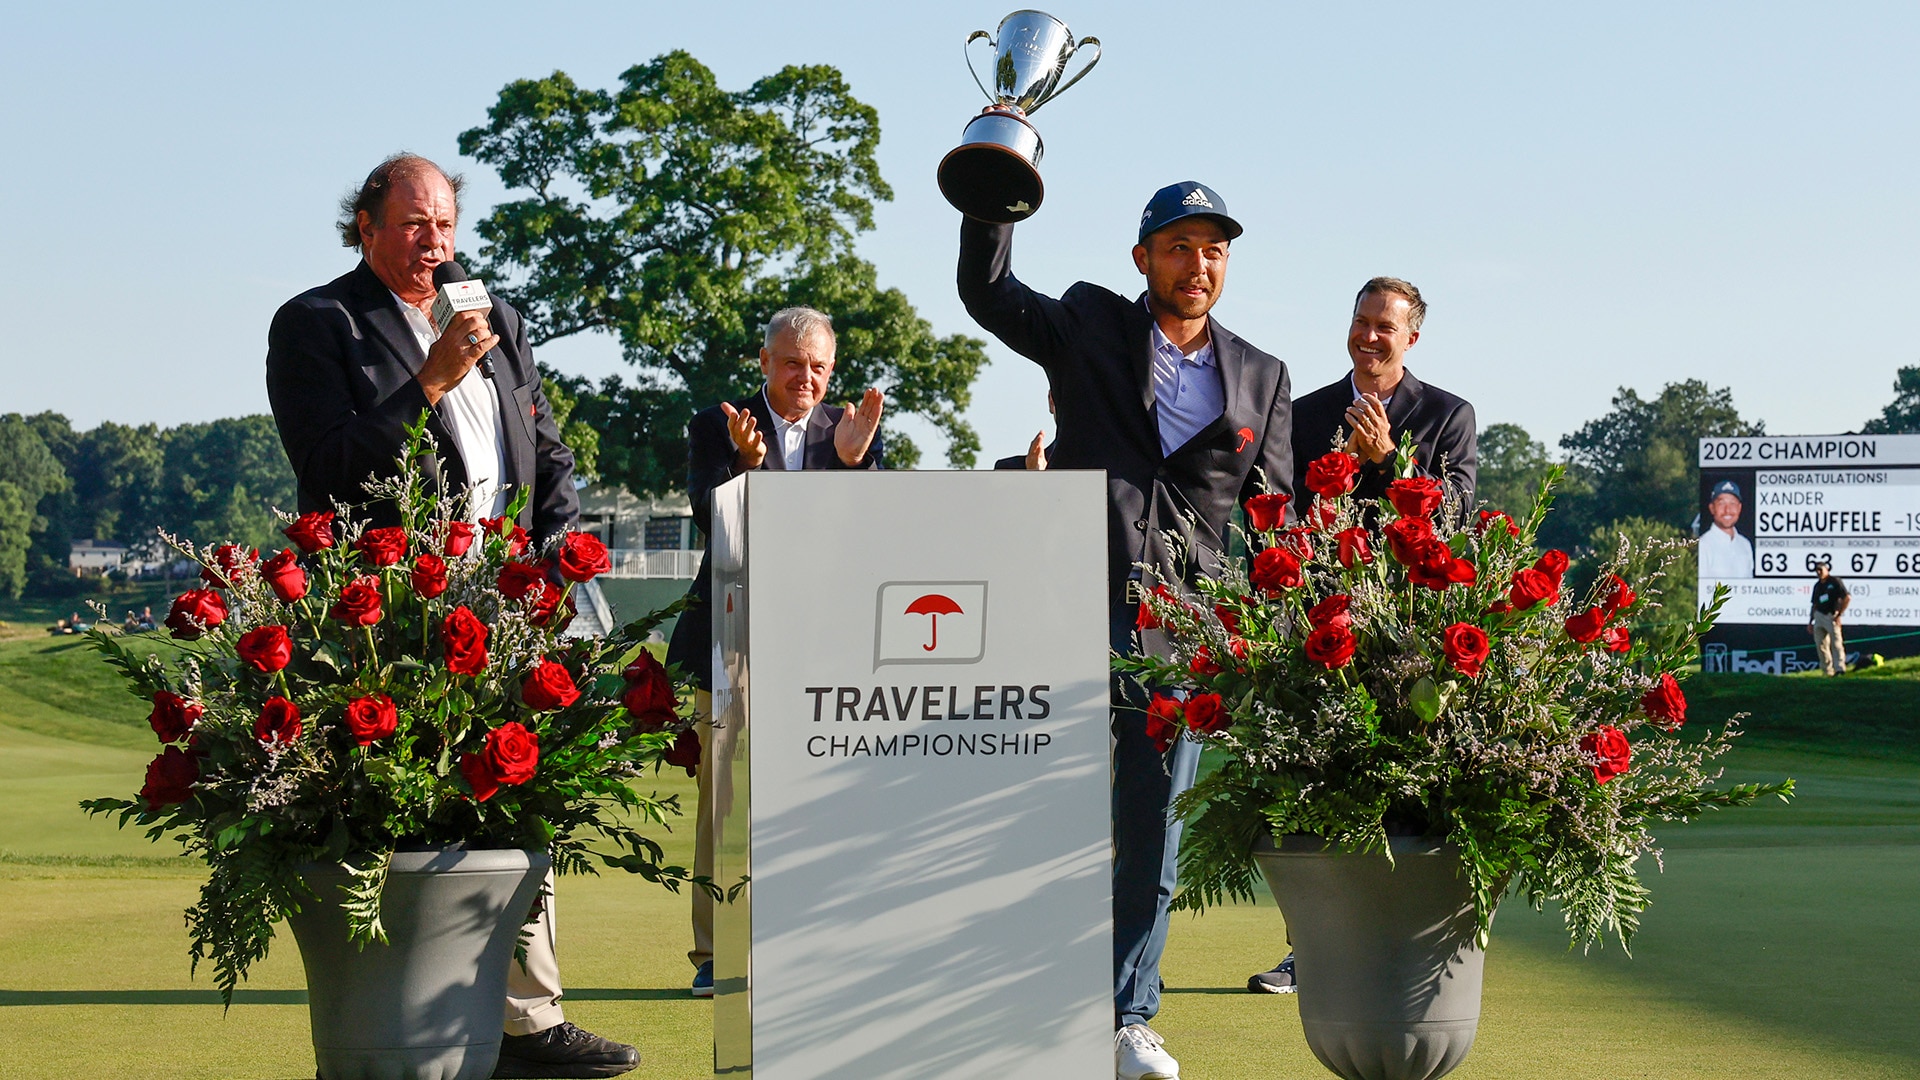 Xander Schauffele wins at Travelers after Sahith Theegala’s double bogey